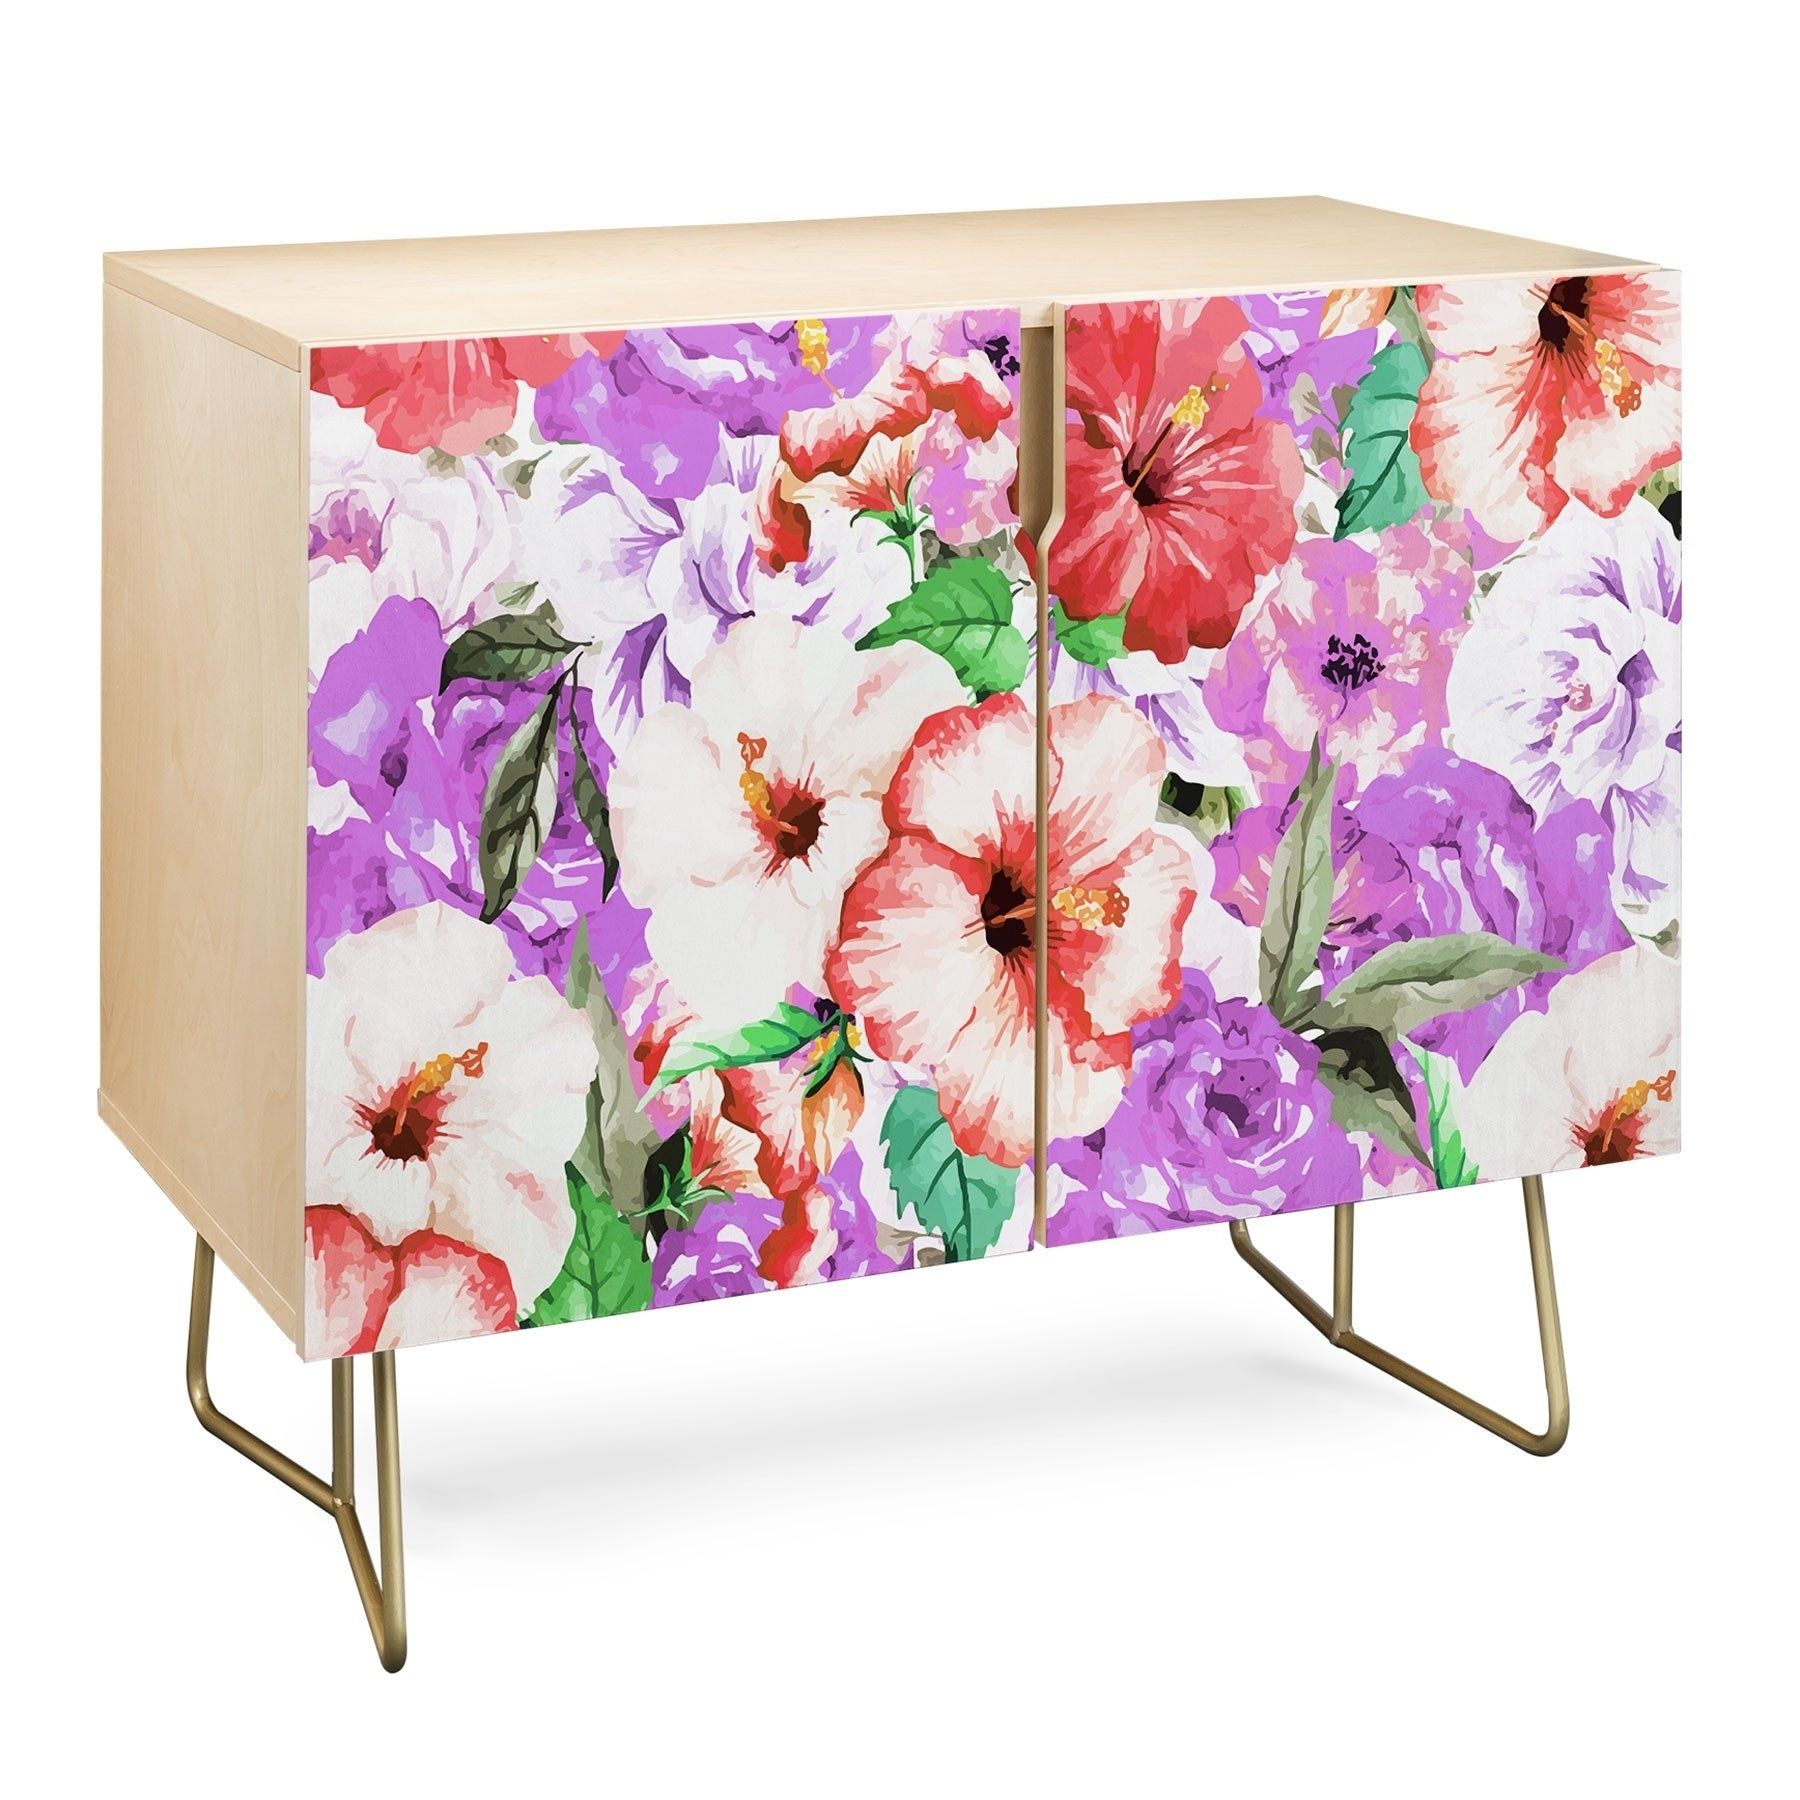 Deny Designs Purple Floral Credenza (birch Or Walnut, 2 Leg Options) Throughout Purple Floral Credenzas (View 4 of 30)